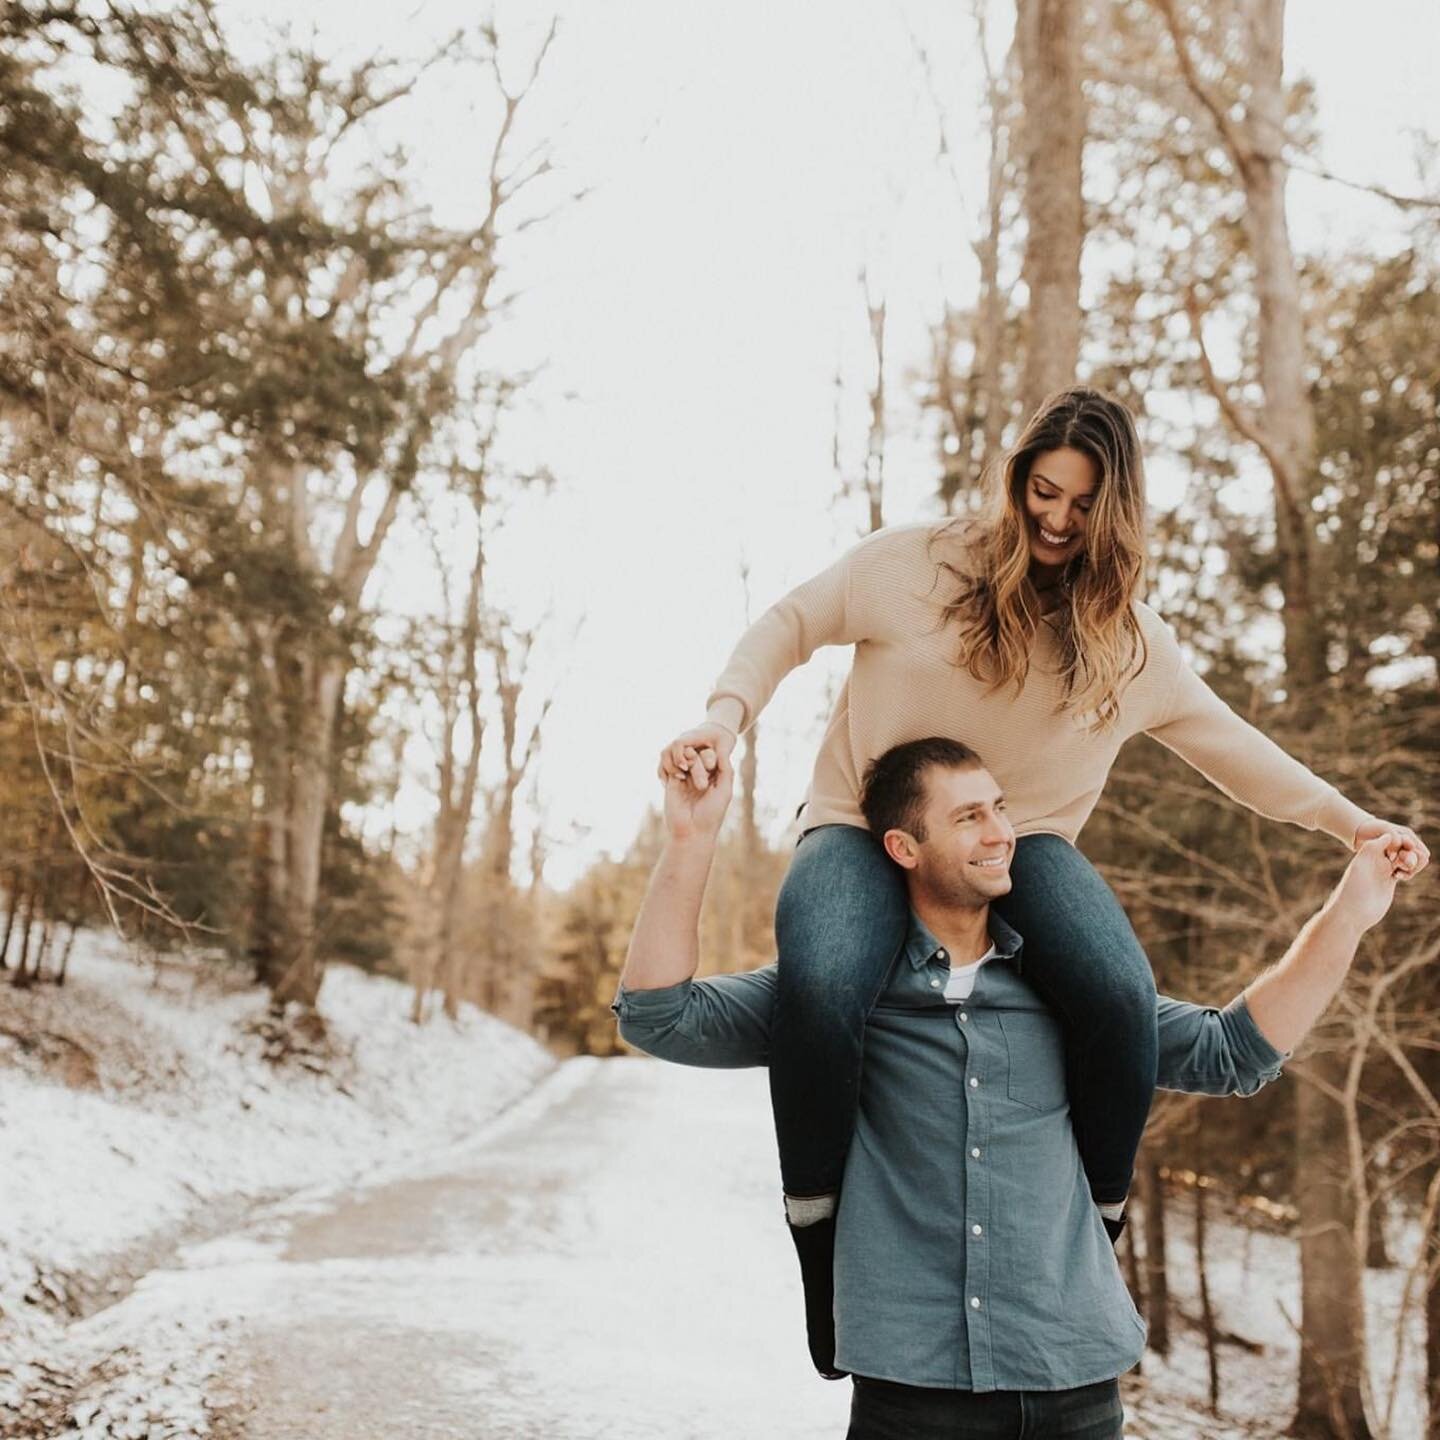 more snowy engagement sessions &mdash; p-p-p please ✨